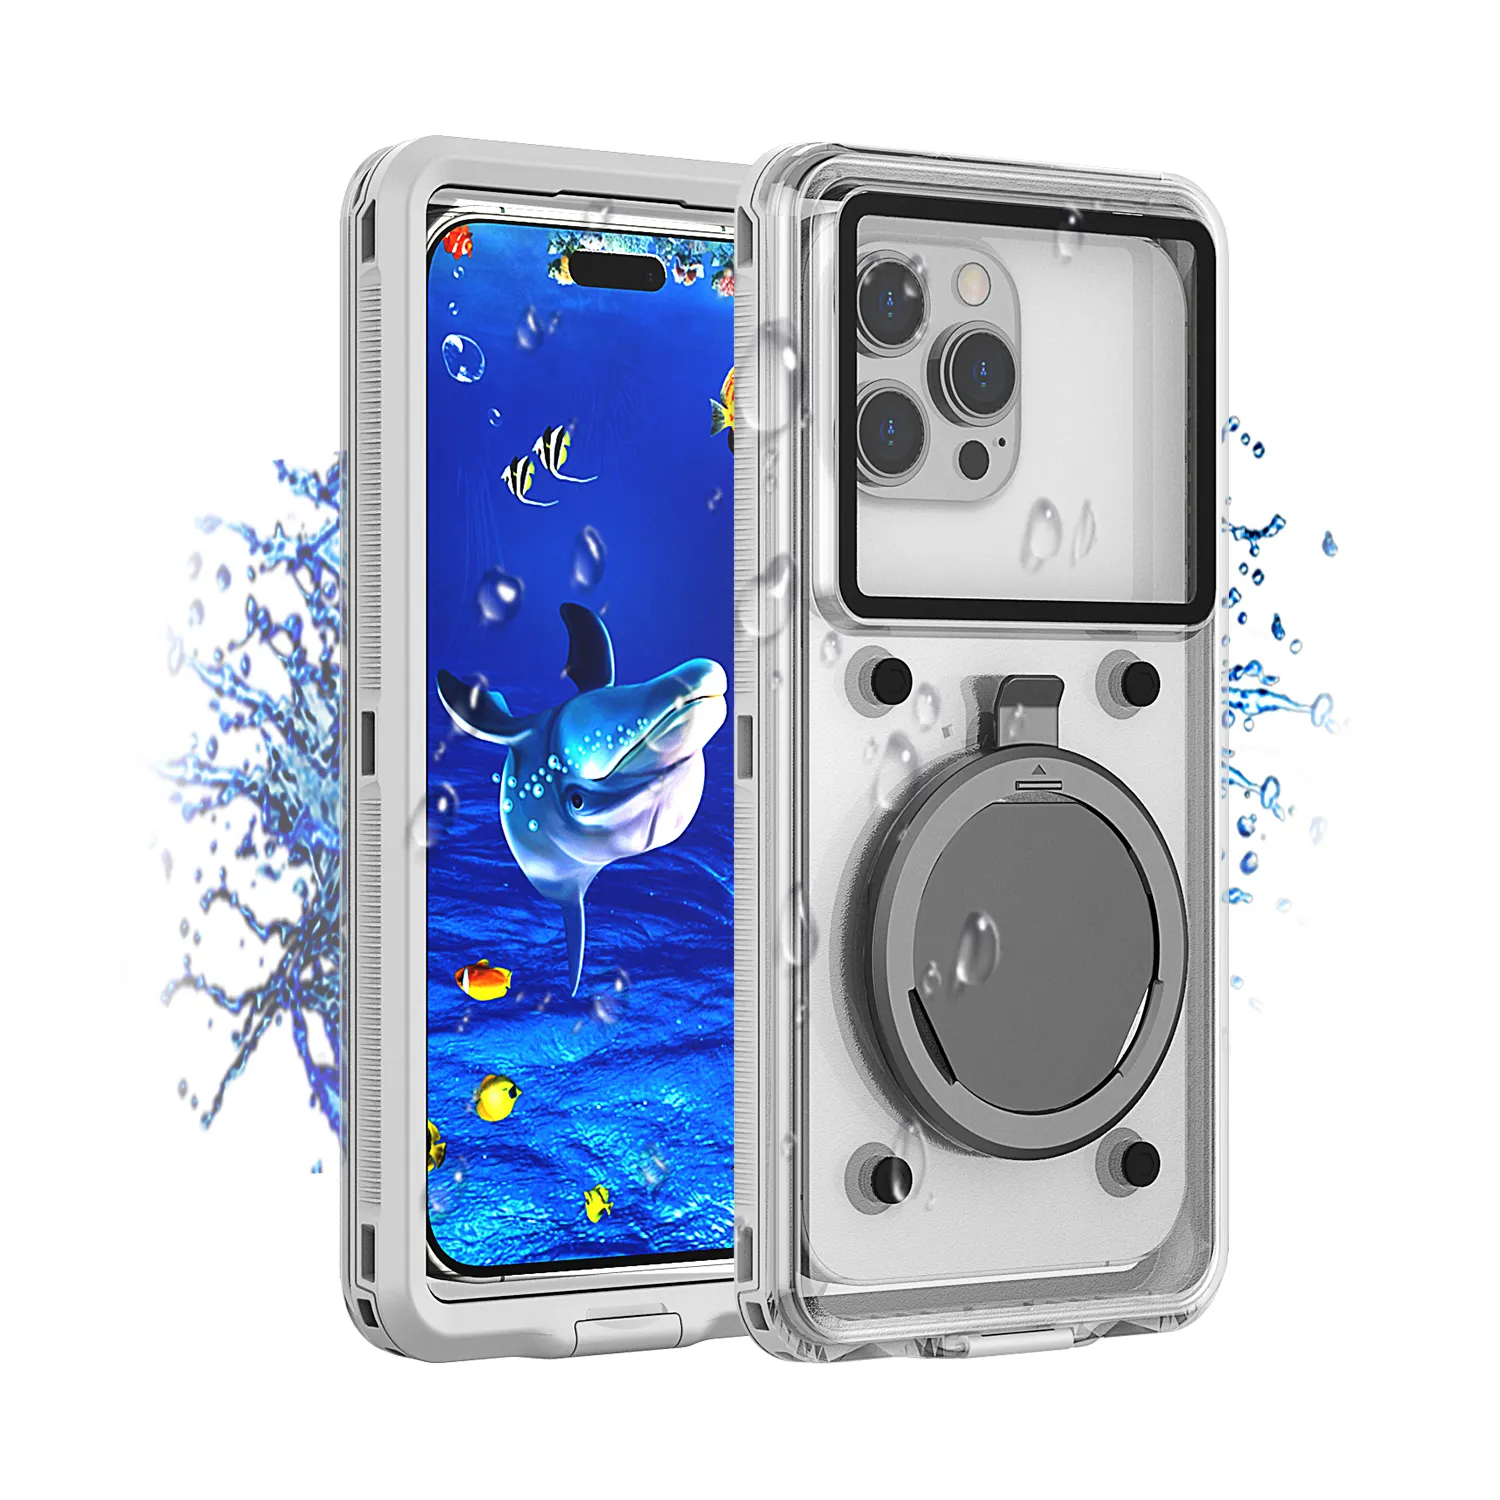 TPU PC Outdoor Swimming Underwater Universal Clear Water Proof Phone Case Waterproof Shockproof Cover Cell Phone Case